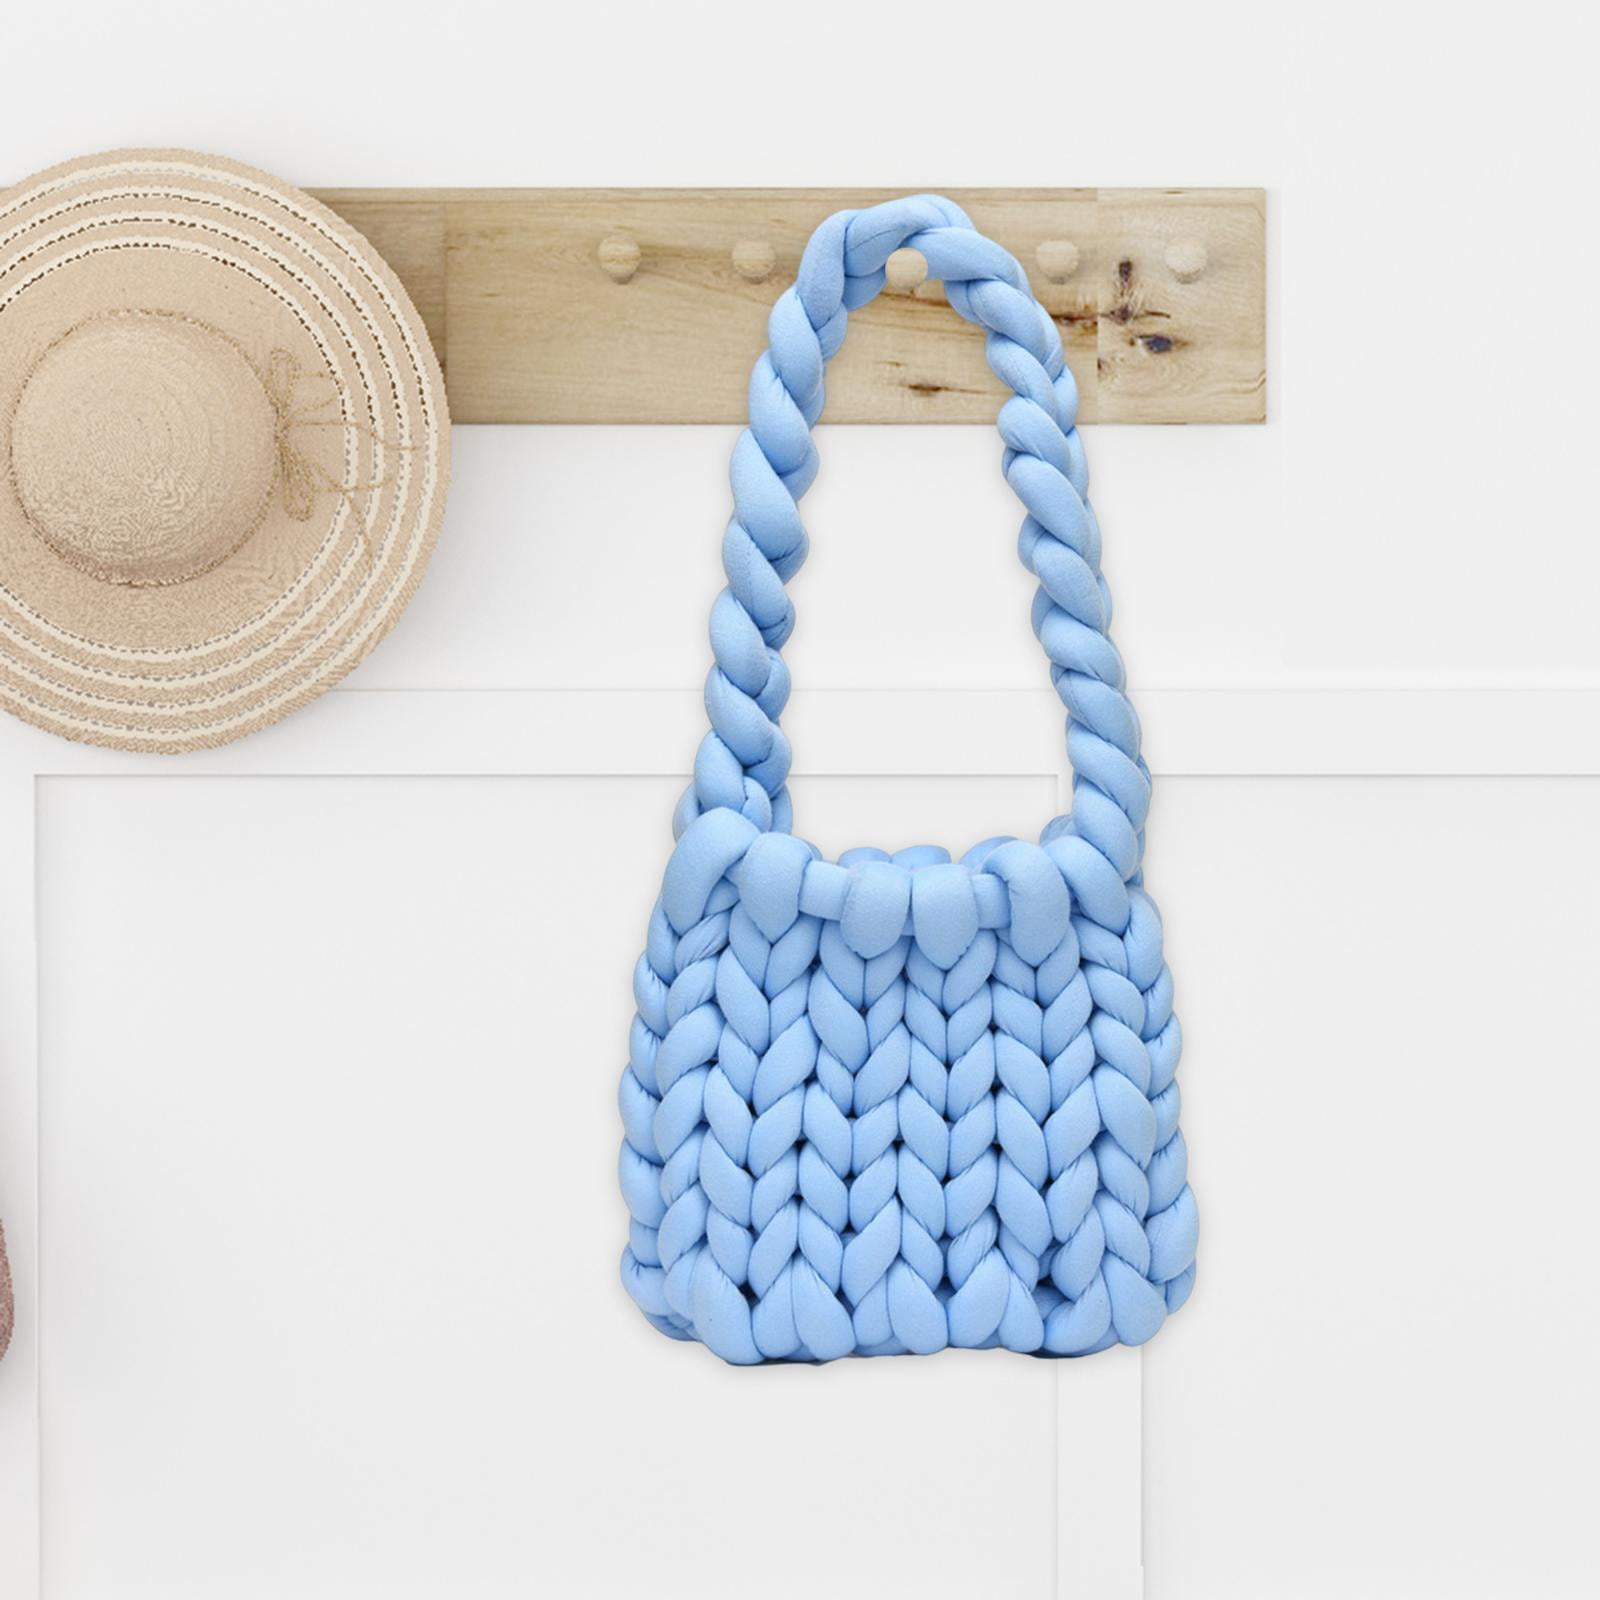 Premium Photo  Women's hands crocheting a bag from knitted yarn. flatley  from scissors, centimeter, hook, yarn.